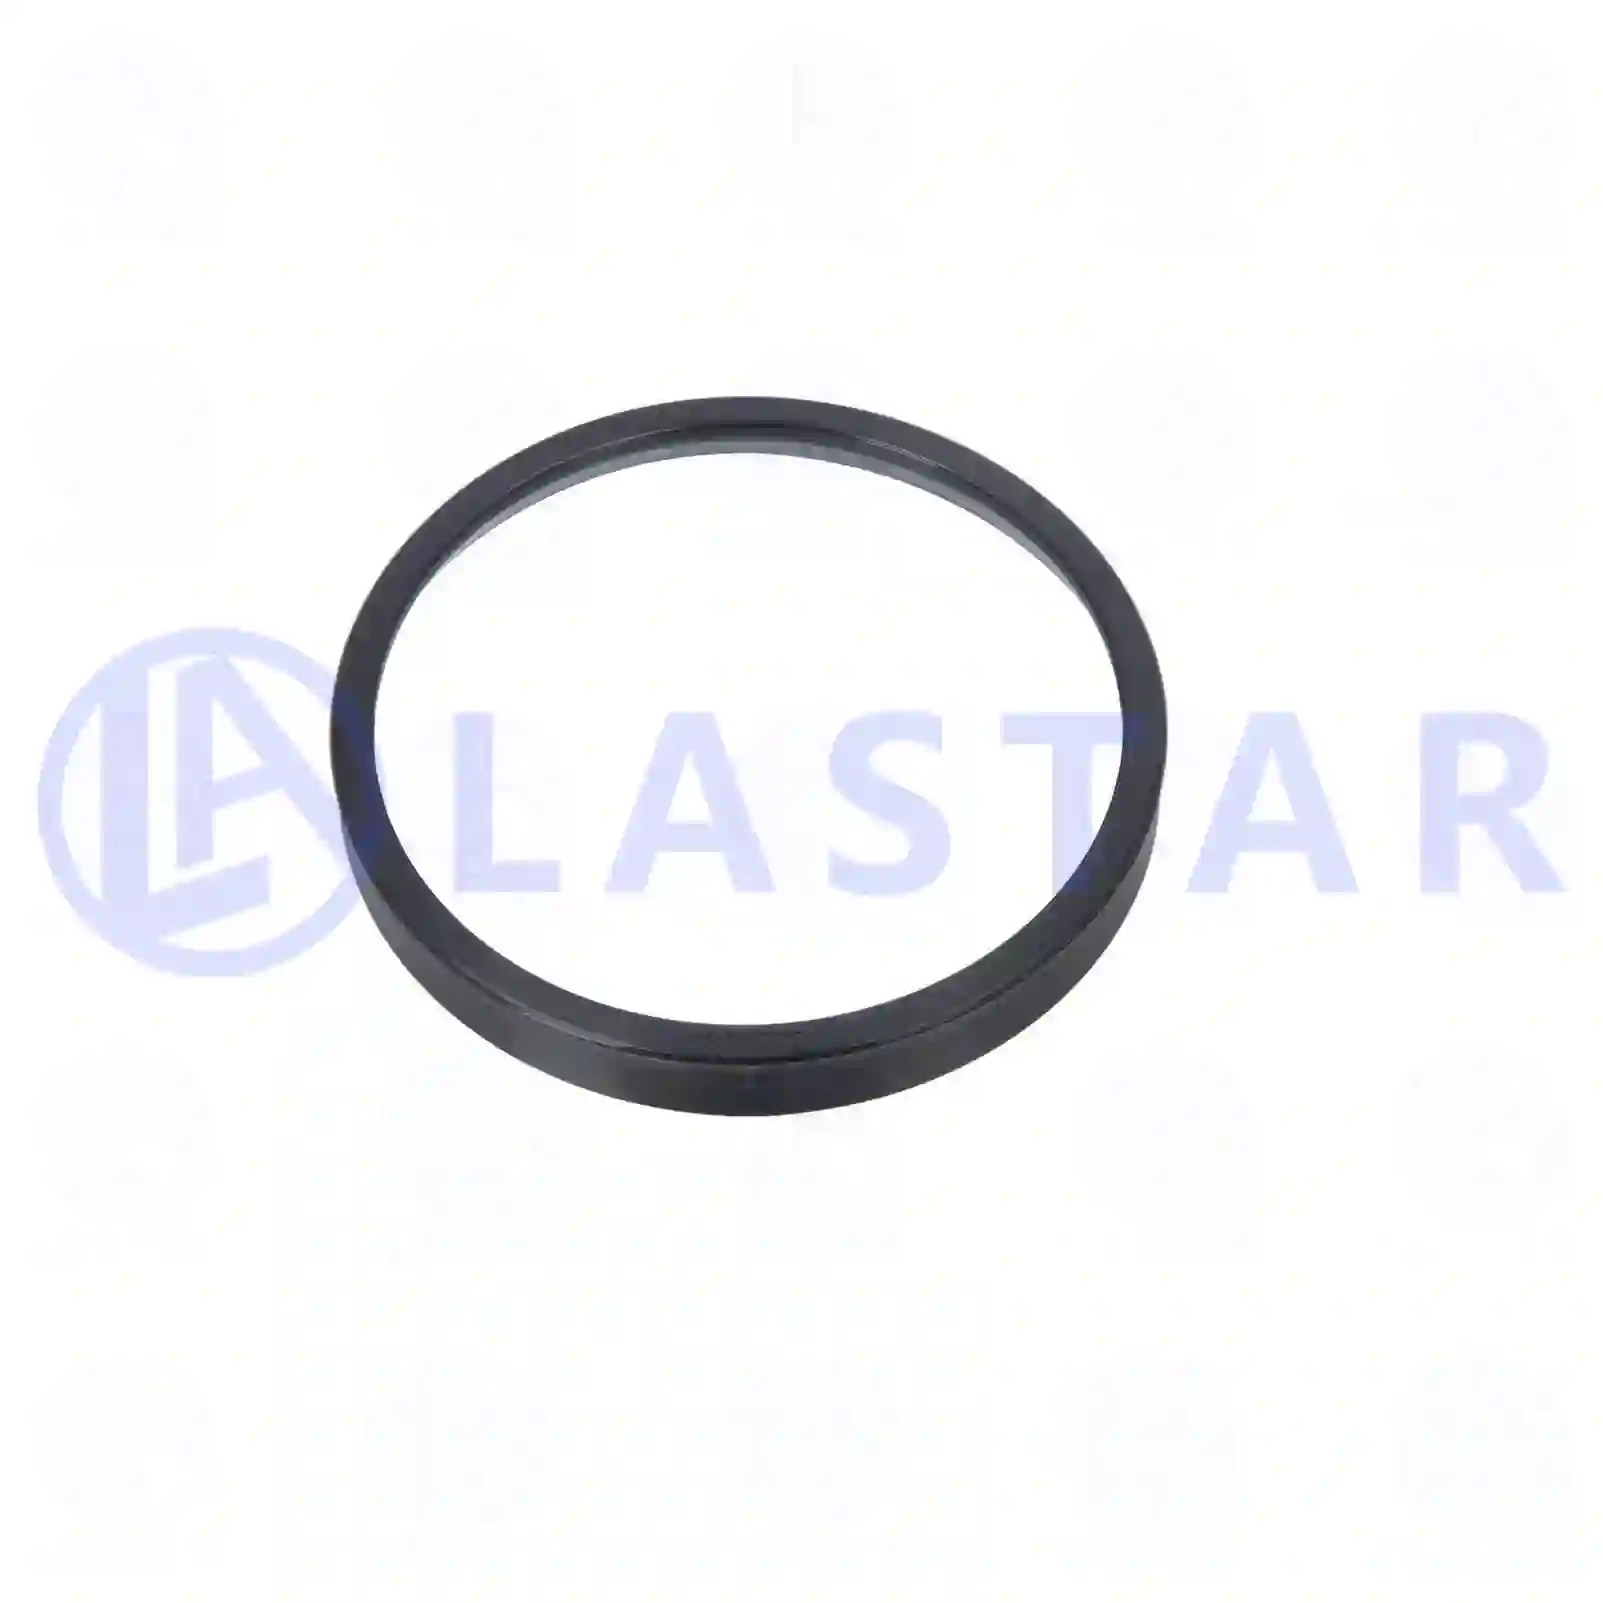 Dust cover, 77734434, 1300977, 1314345, ZG30646-0008 ||  77734434 Lastar Spare Part | Truck Spare Parts, Auotomotive Spare Parts Dust cover, 77734434, 1300977, 1314345, ZG30646-0008 ||  77734434 Lastar Spare Part | Truck Spare Parts, Auotomotive Spare Parts